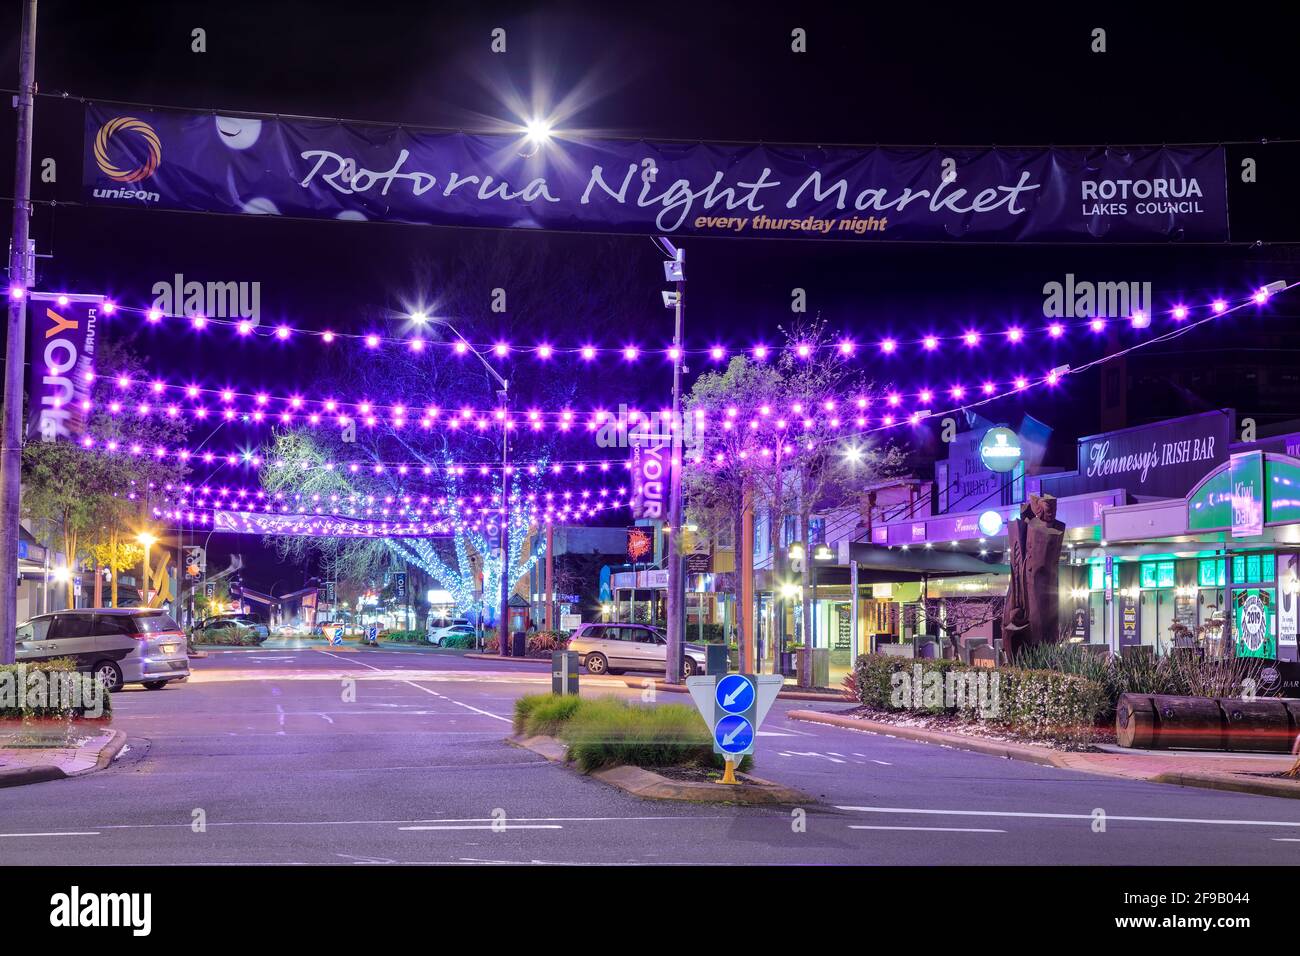 Rotorua, New Zealand, at night. Tutanekai Street is decorated with colorful lights and a banner advertising the city's night market Stock Photo